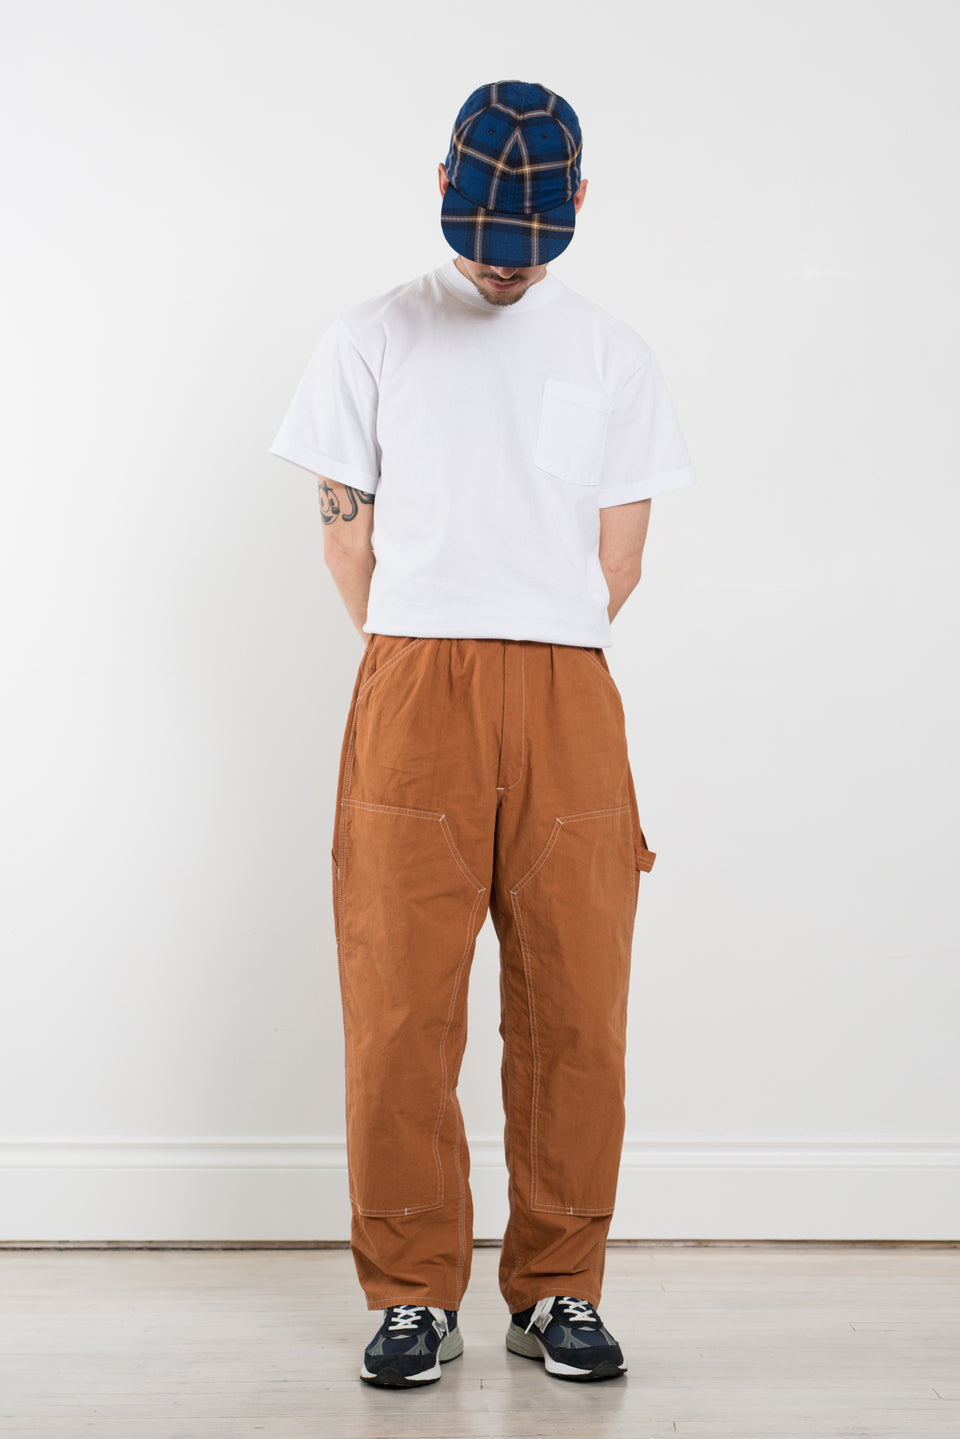 ENDS and MEANS SS22 EM221P02 Japan Double Knee Painter Pants Persimmon Calculus Victoria BC Canada